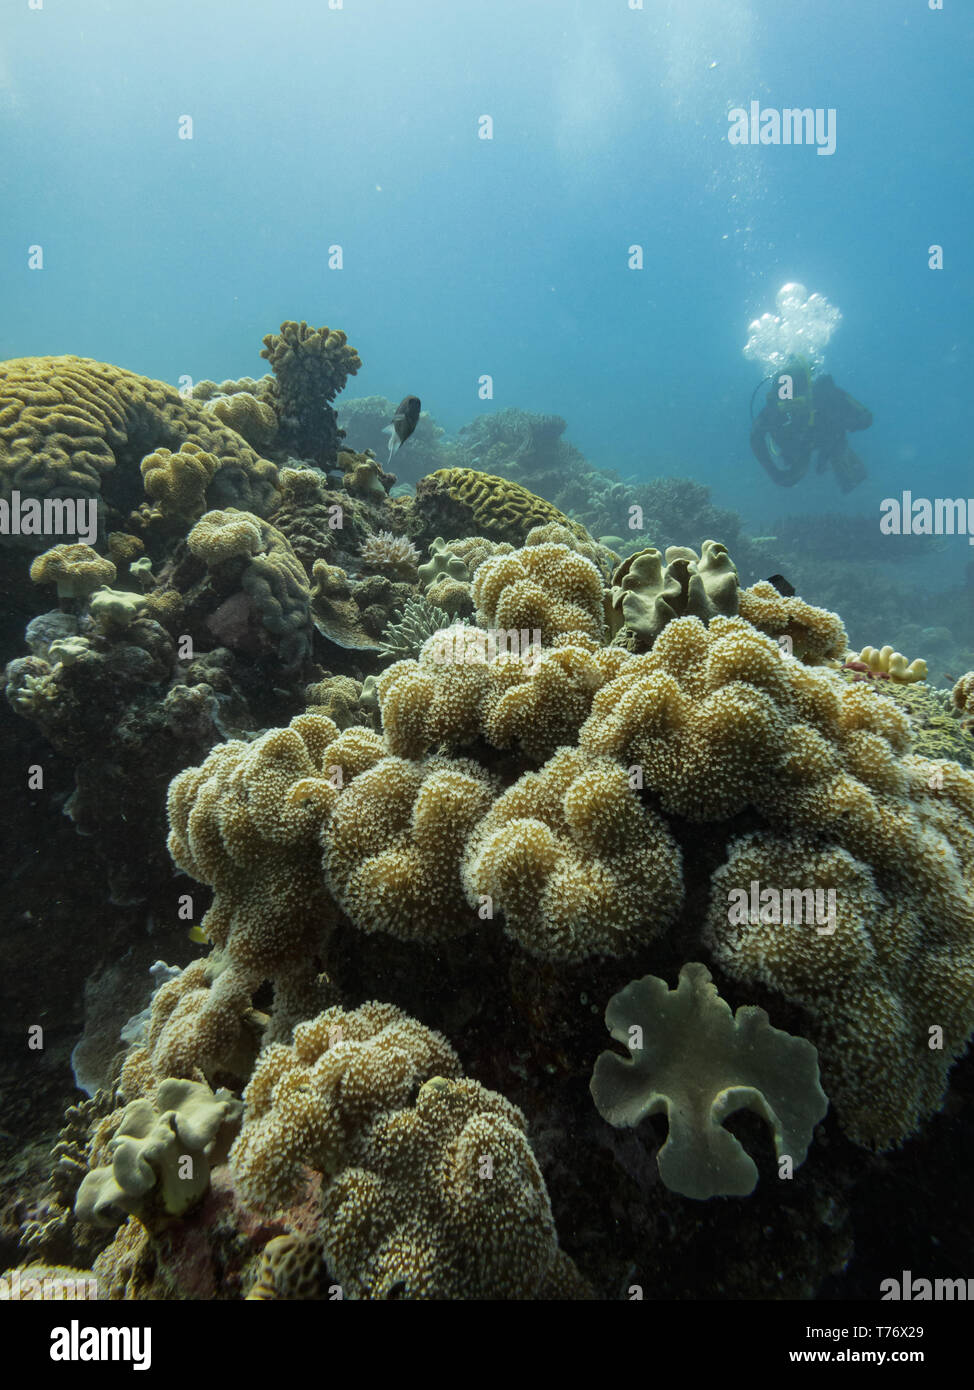 Closeup of leather, staghorn coral, Acropora cervicornis, Elkhorn coral, Acropora palmata,   and brain coral, Diploria labyrinthiformis,  Grooved brai Stock Photo